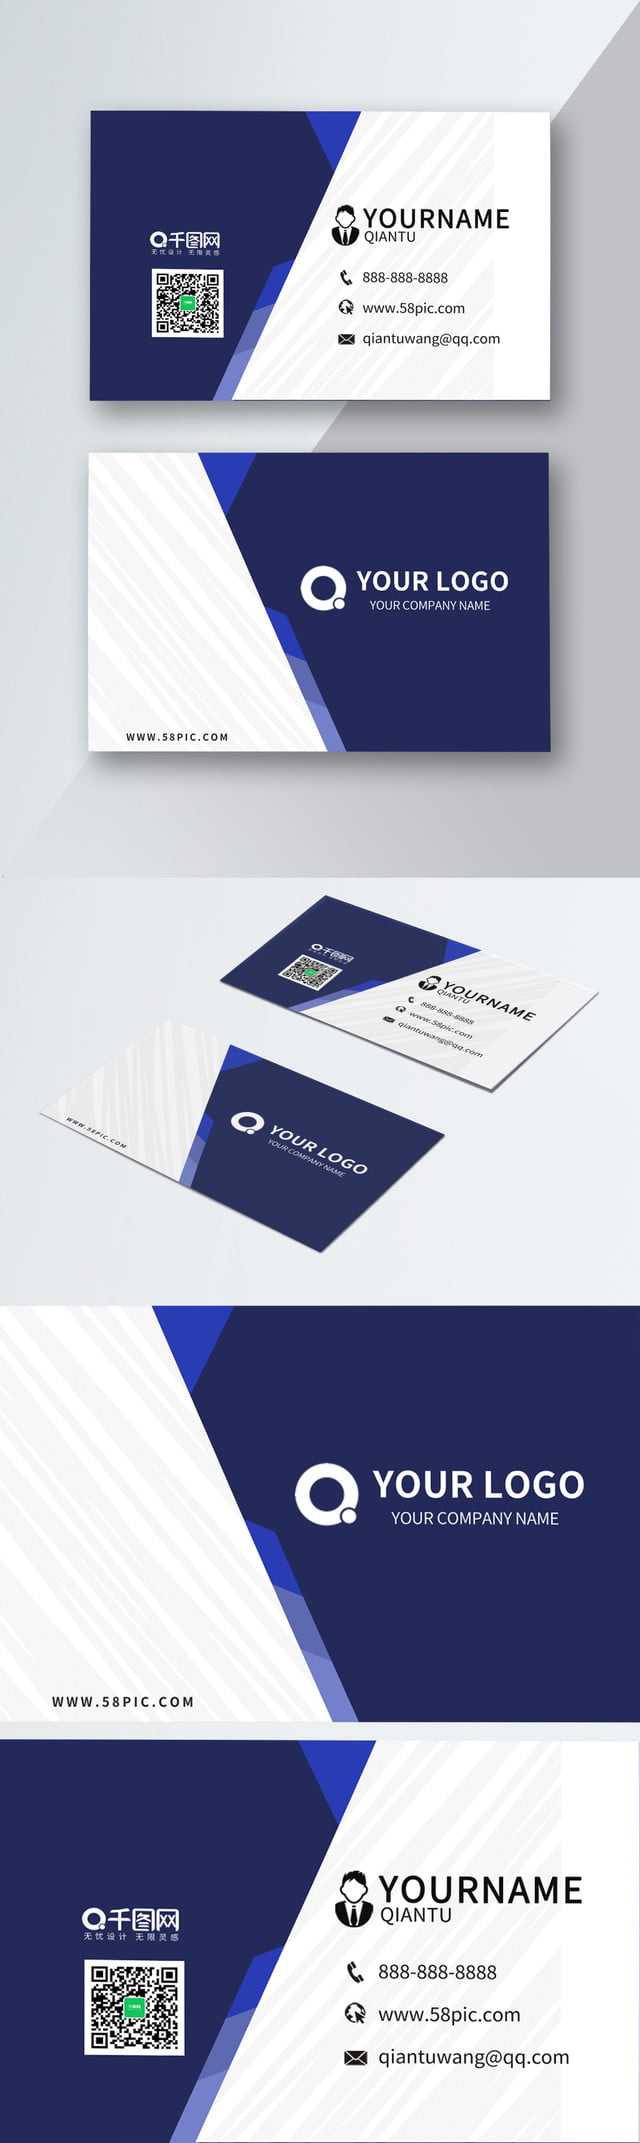 Transport Business Card Express Business Card Car Vehicle For Transport Business Cards Templates Free